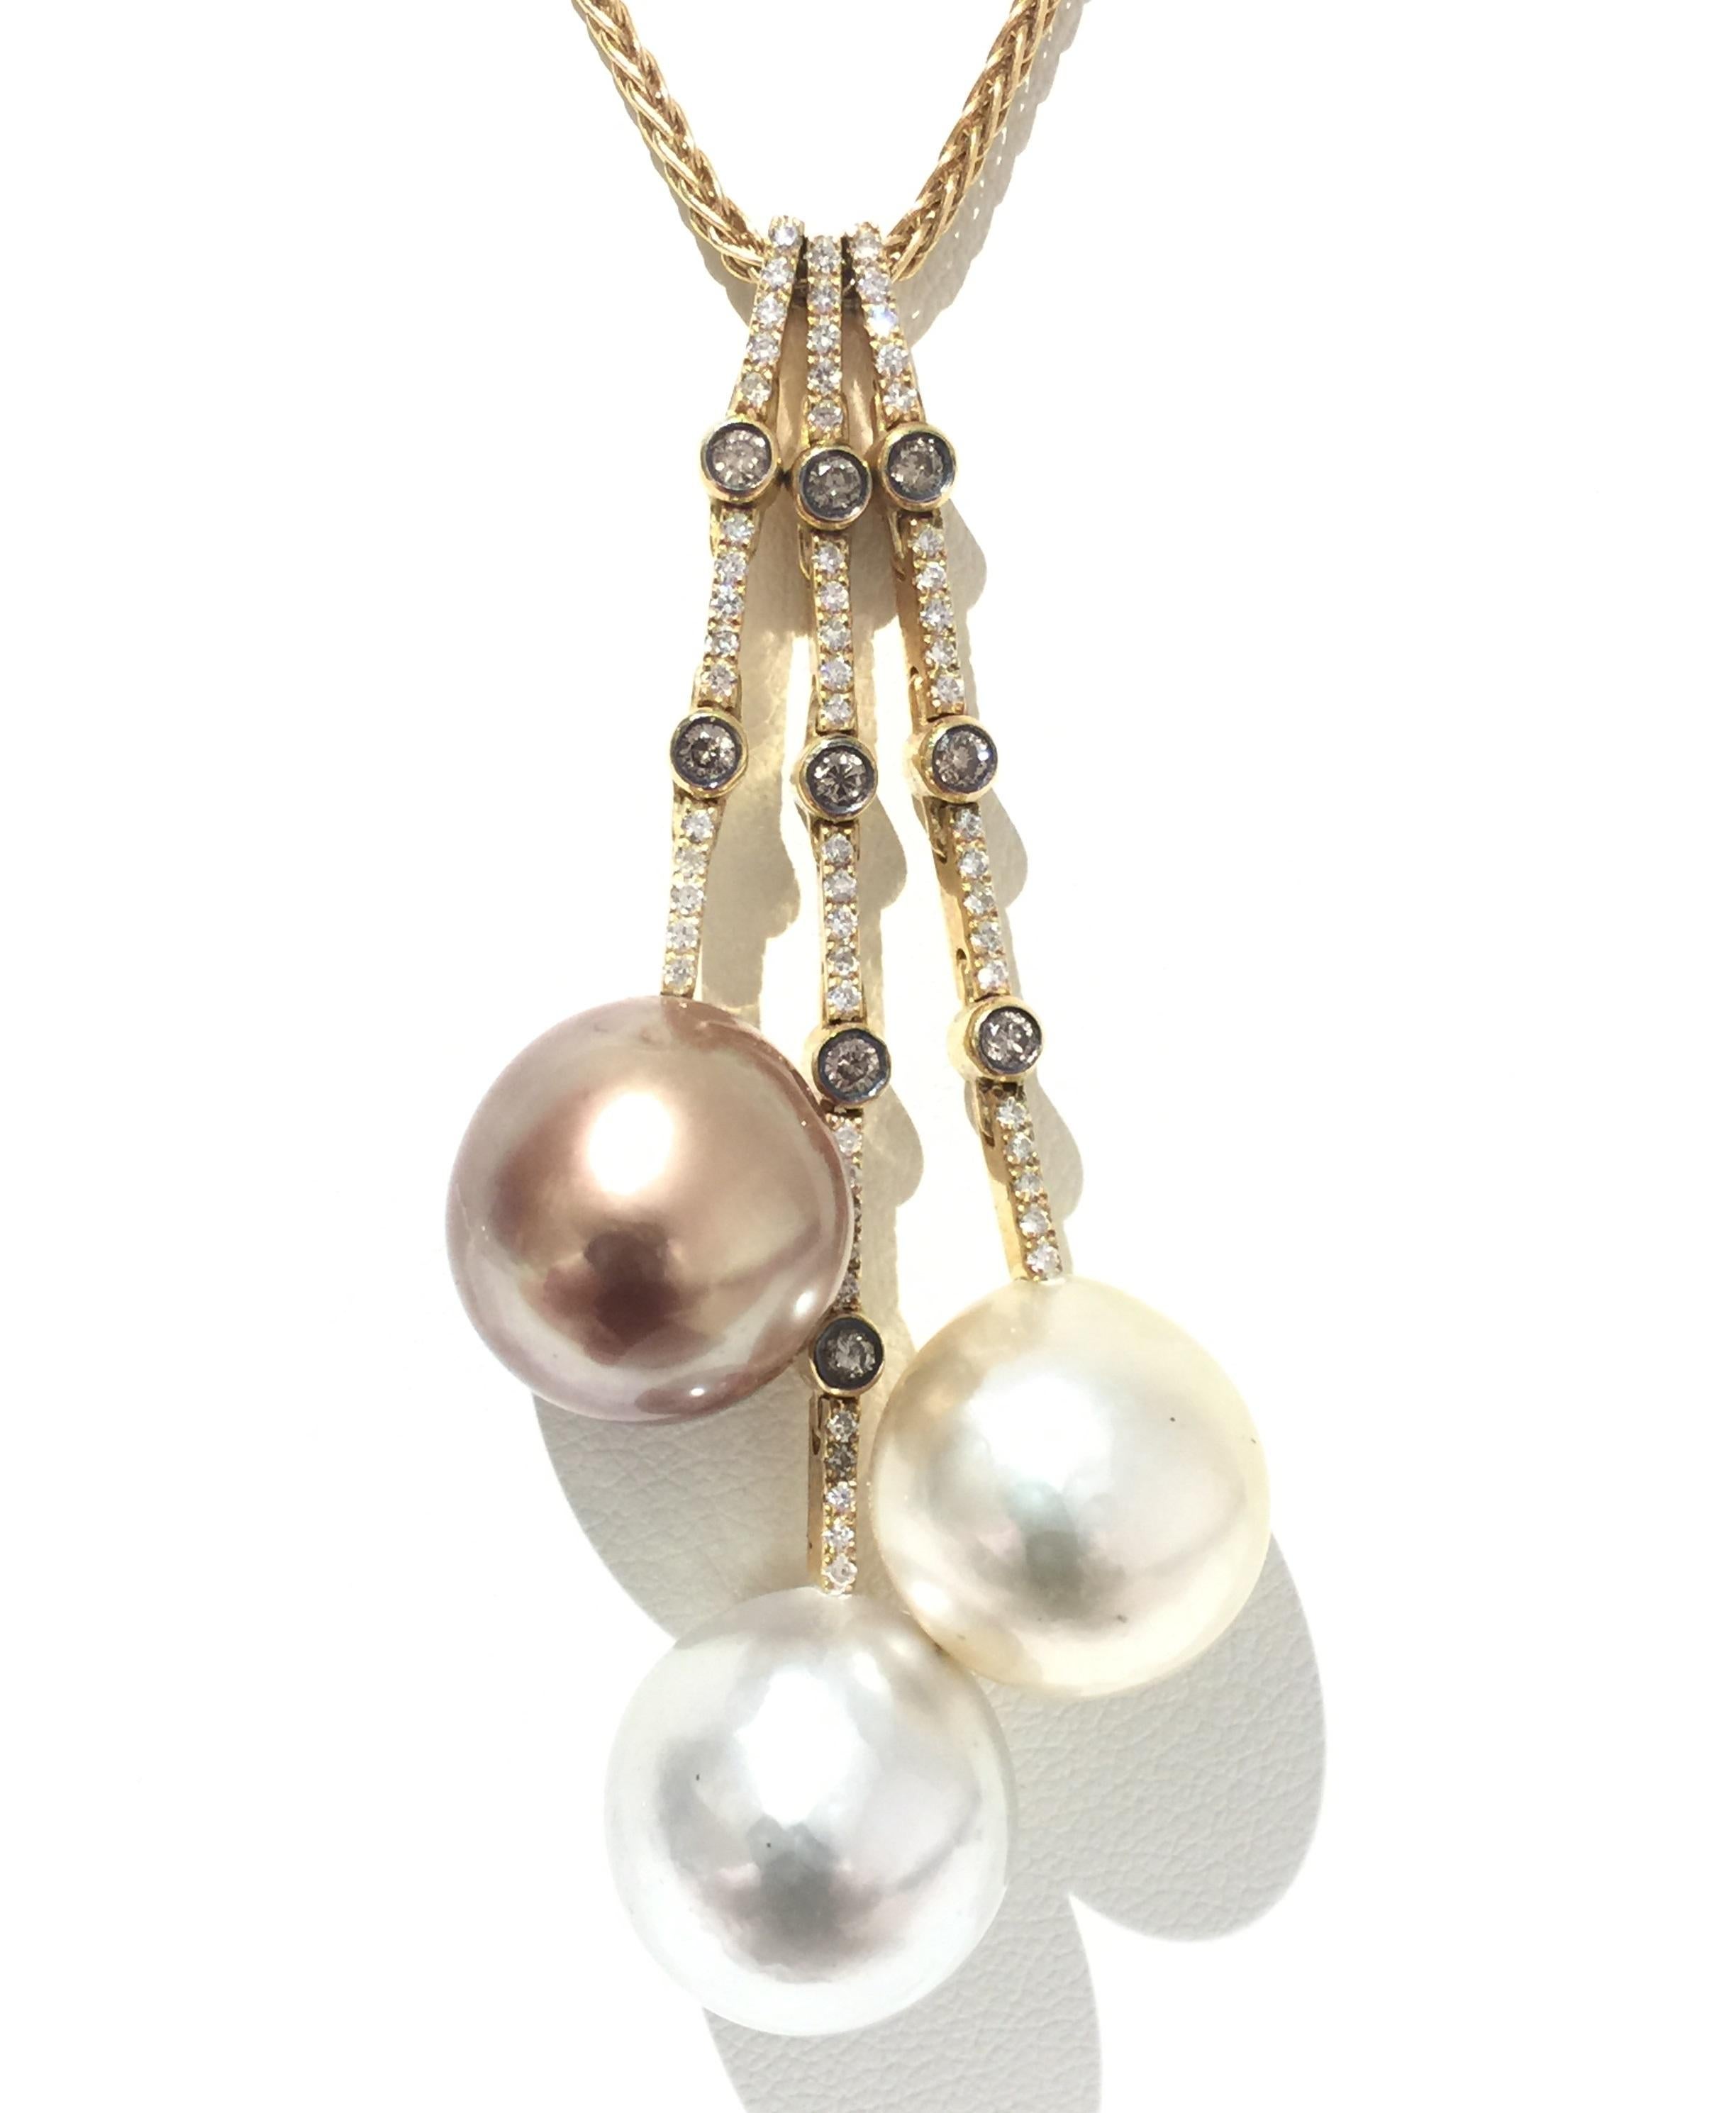 Yvel Pearls and Diamonds Necklace.
18k Yellow Gold 
Pearls 
Diamonds 0.63ctw
N1LAR3GBY